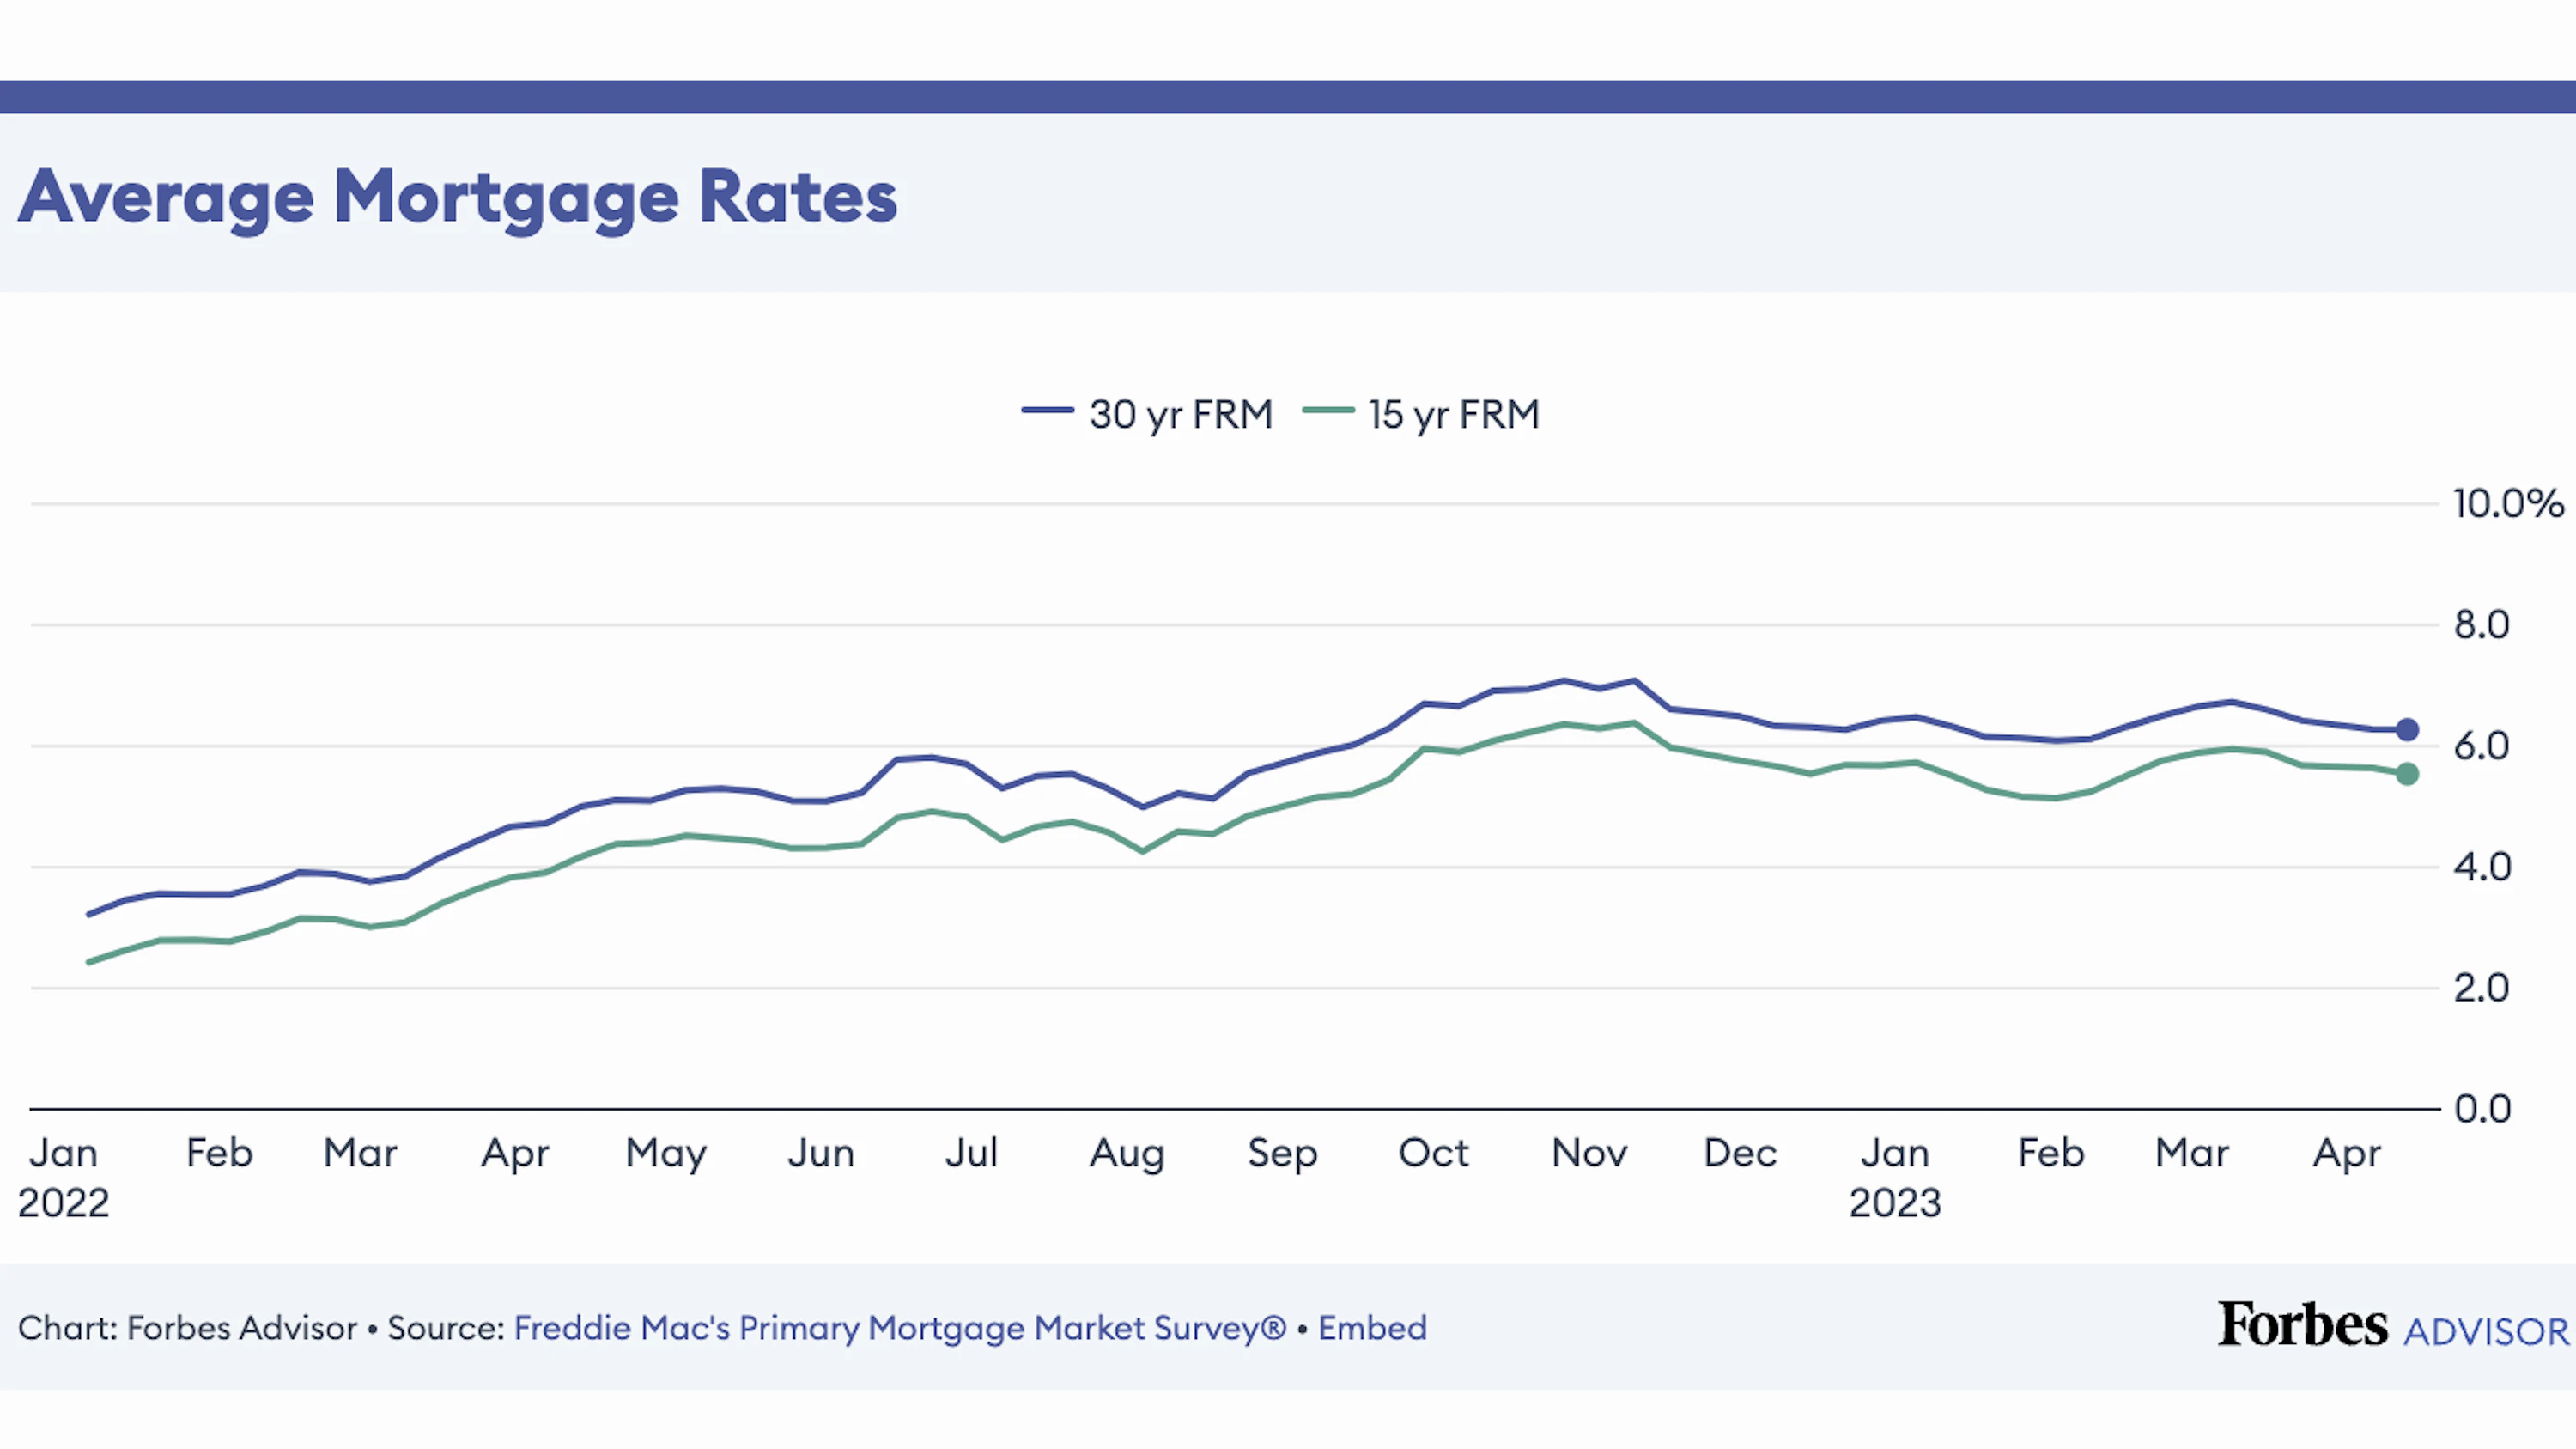 Mortgage rates over 30 years